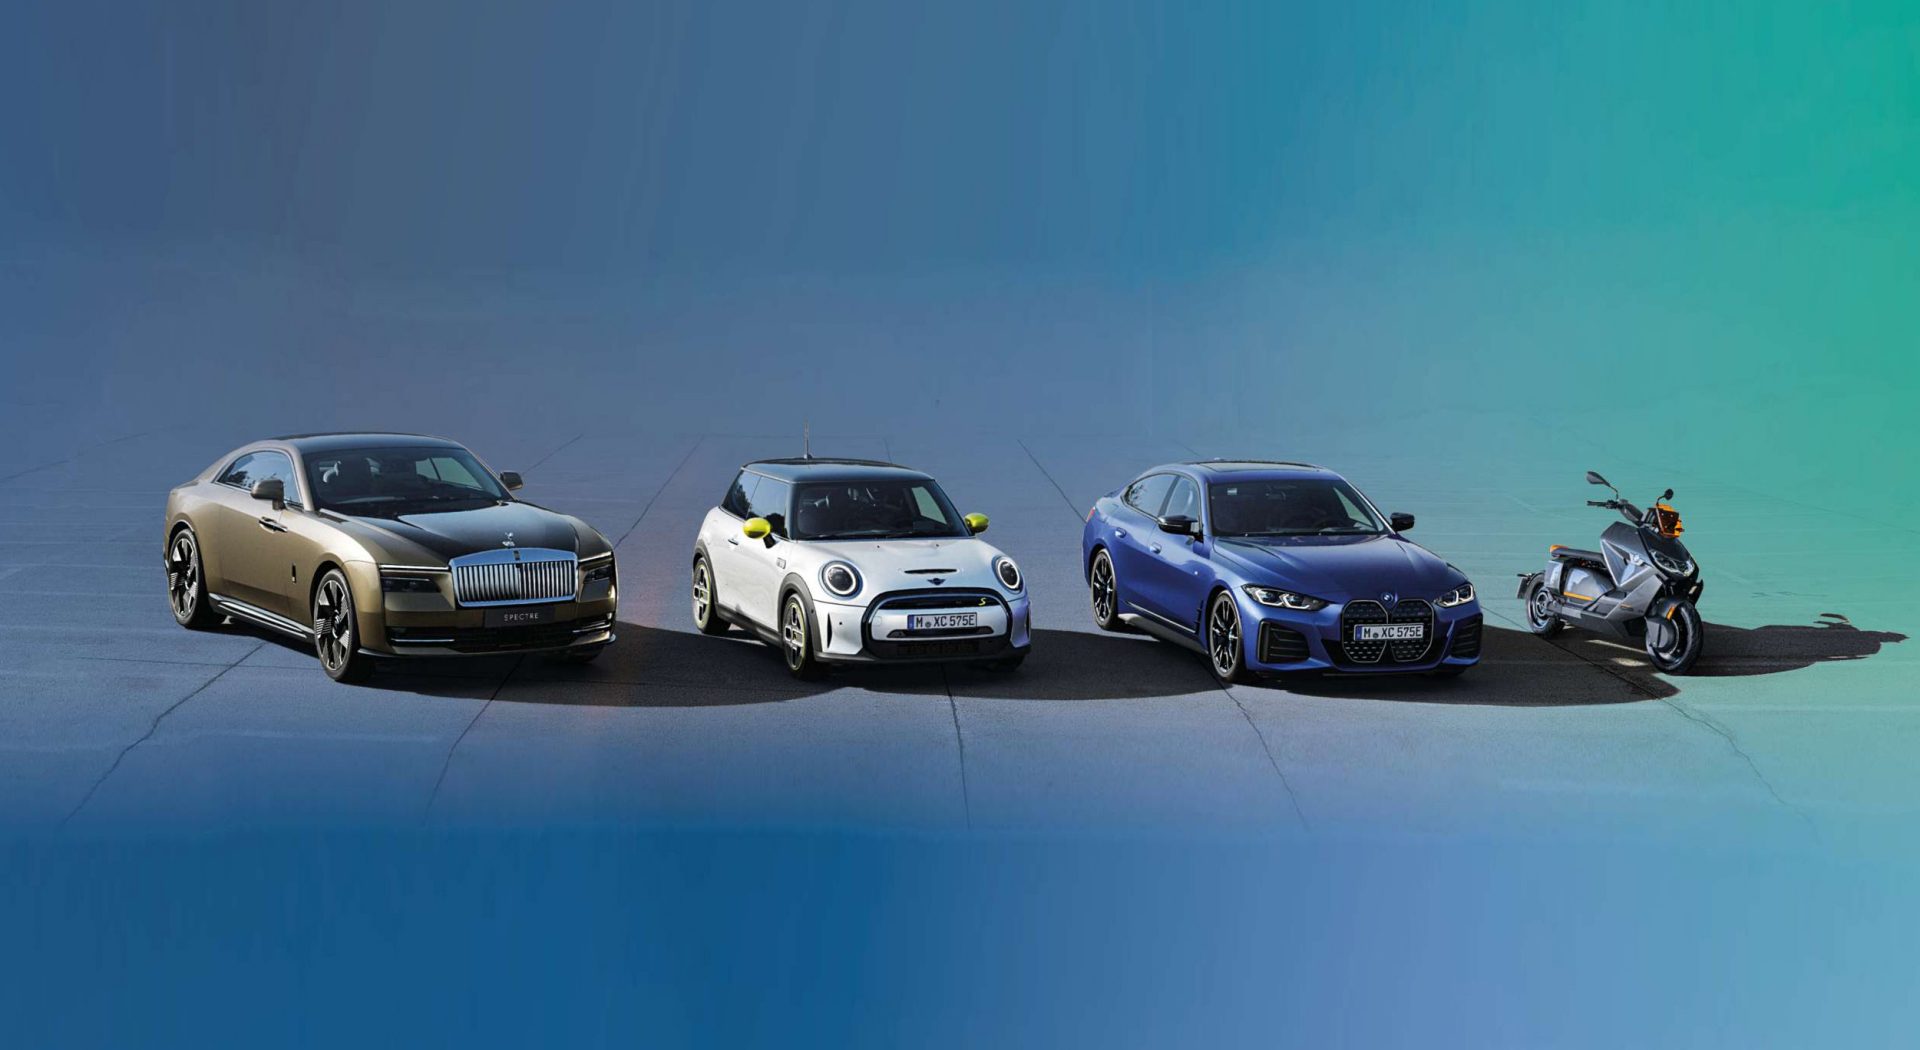 Our brands: Rolls-Royce Motor Cars, MINI, BMW and BMW Motorrad.